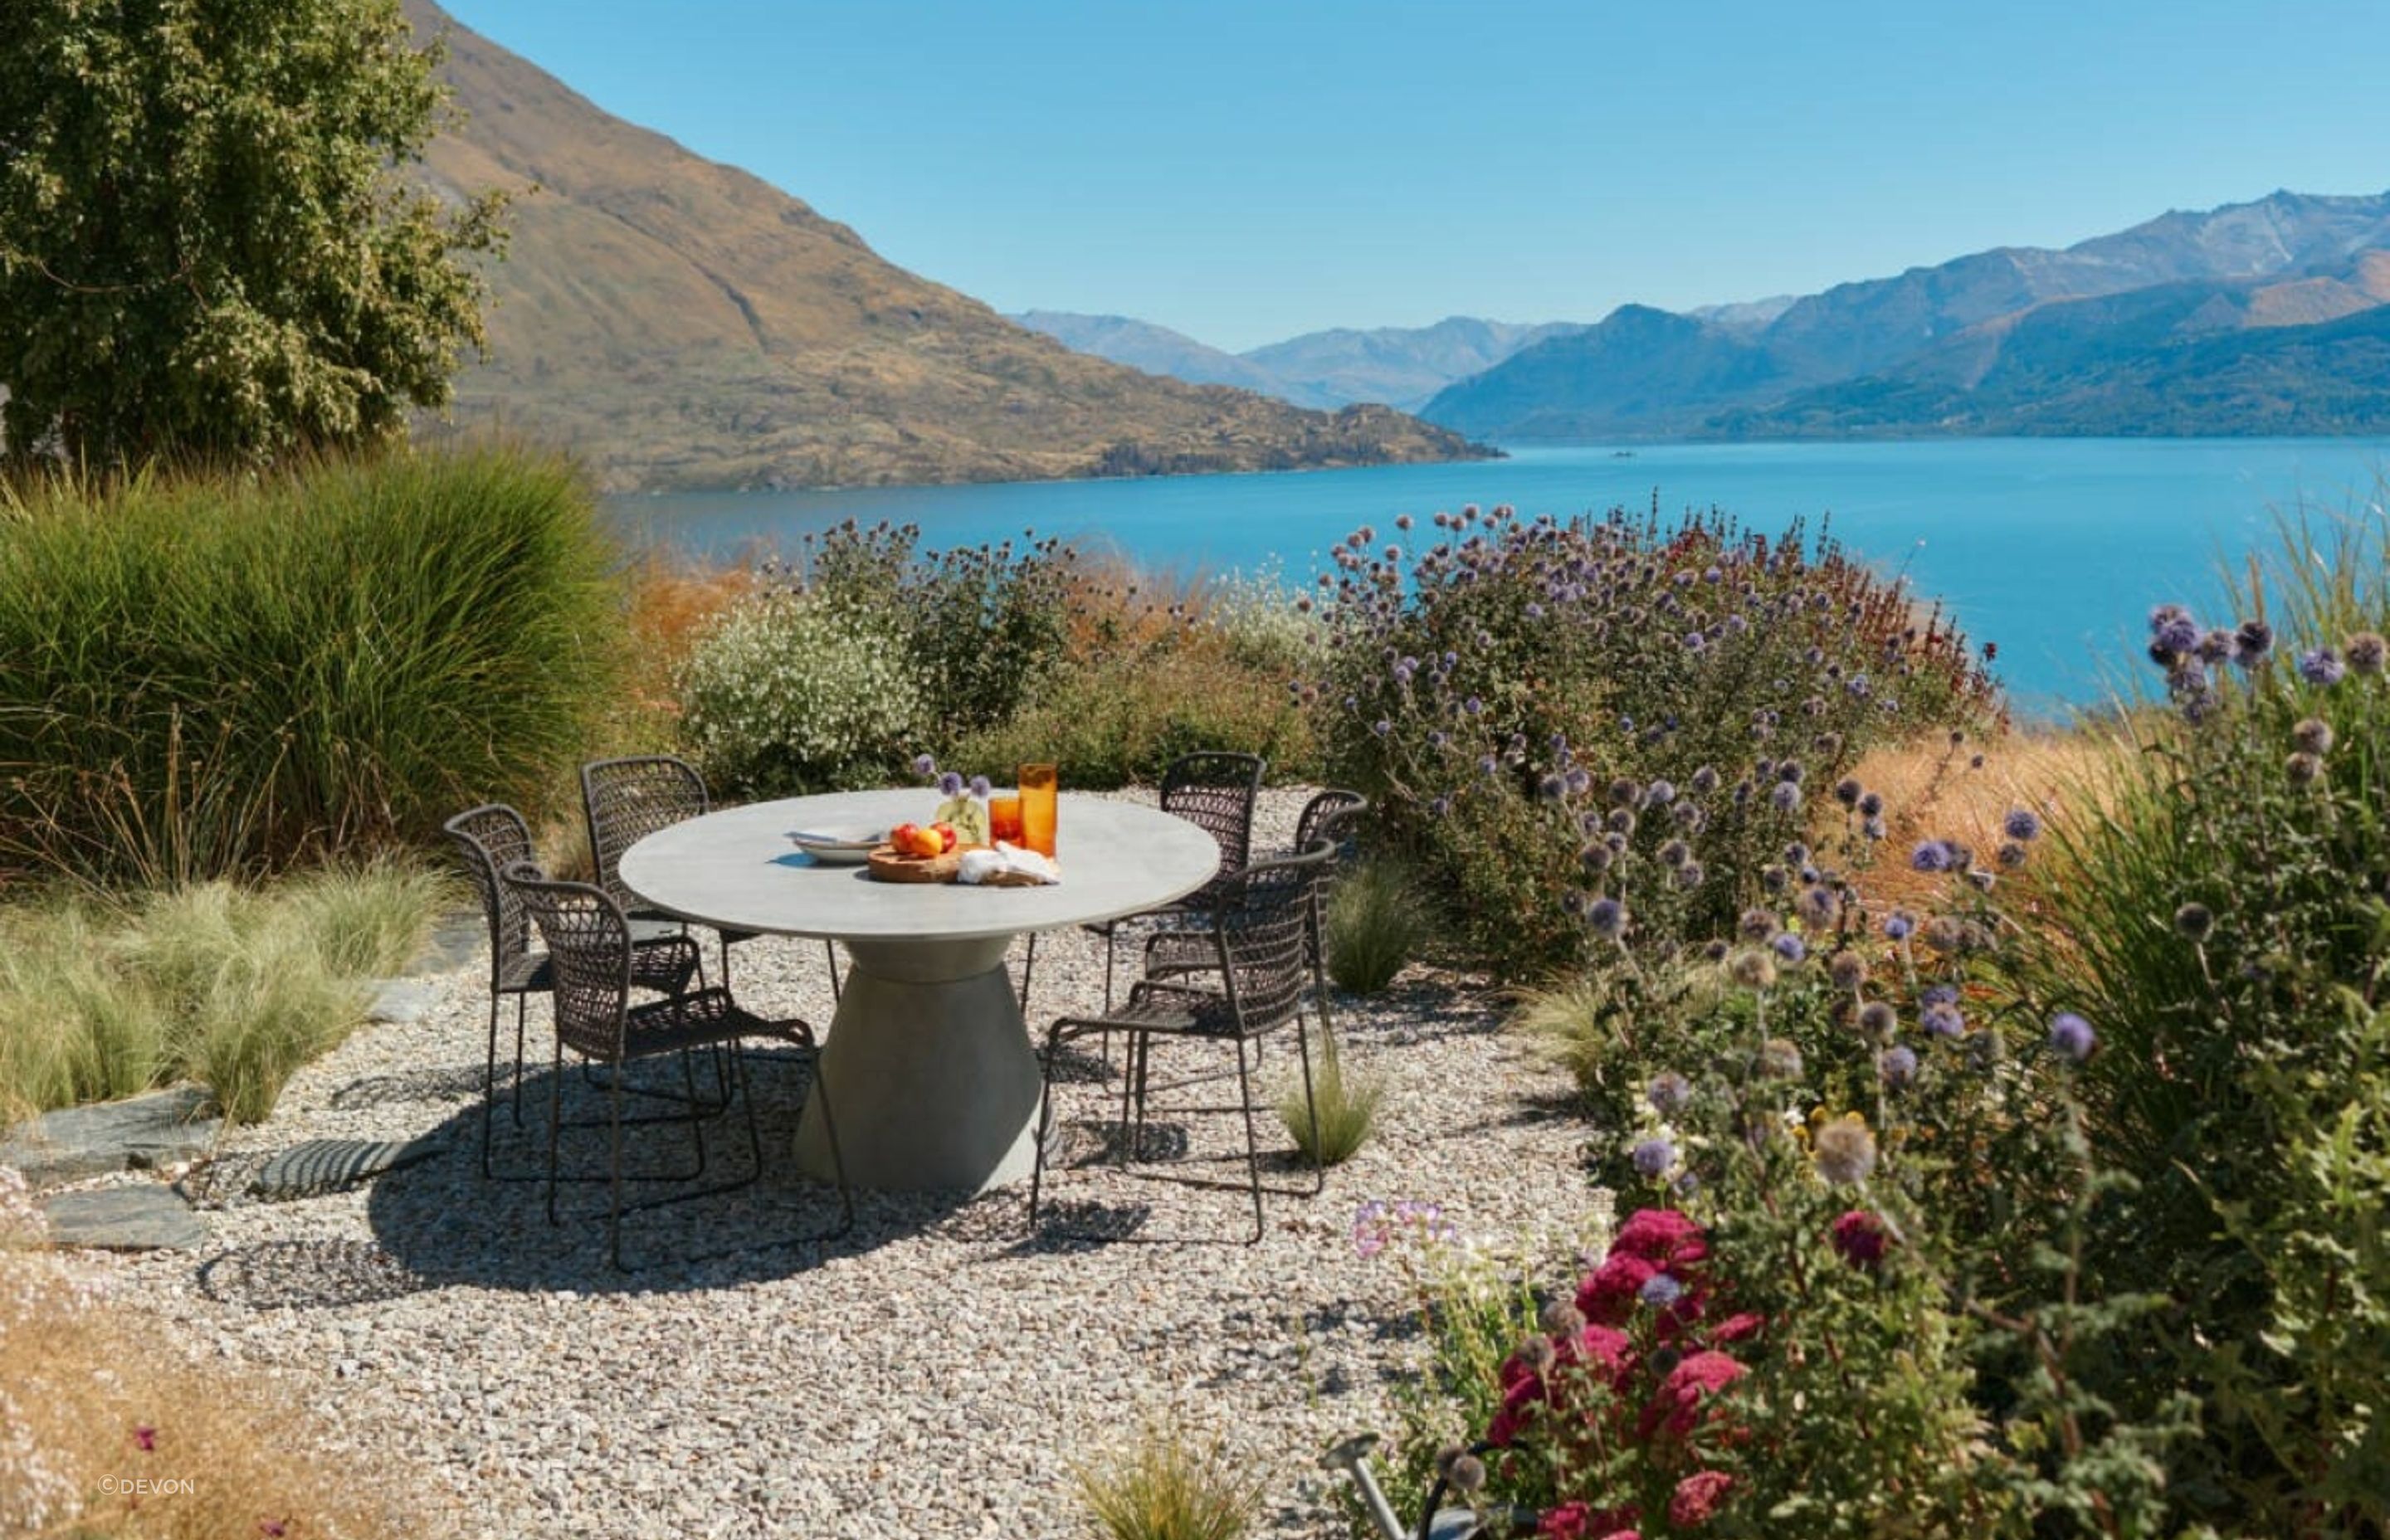 Inspired by Moke Lake in Queenstown, the Moke Dining Table offers a cool, contemporary take on alfresco dining.